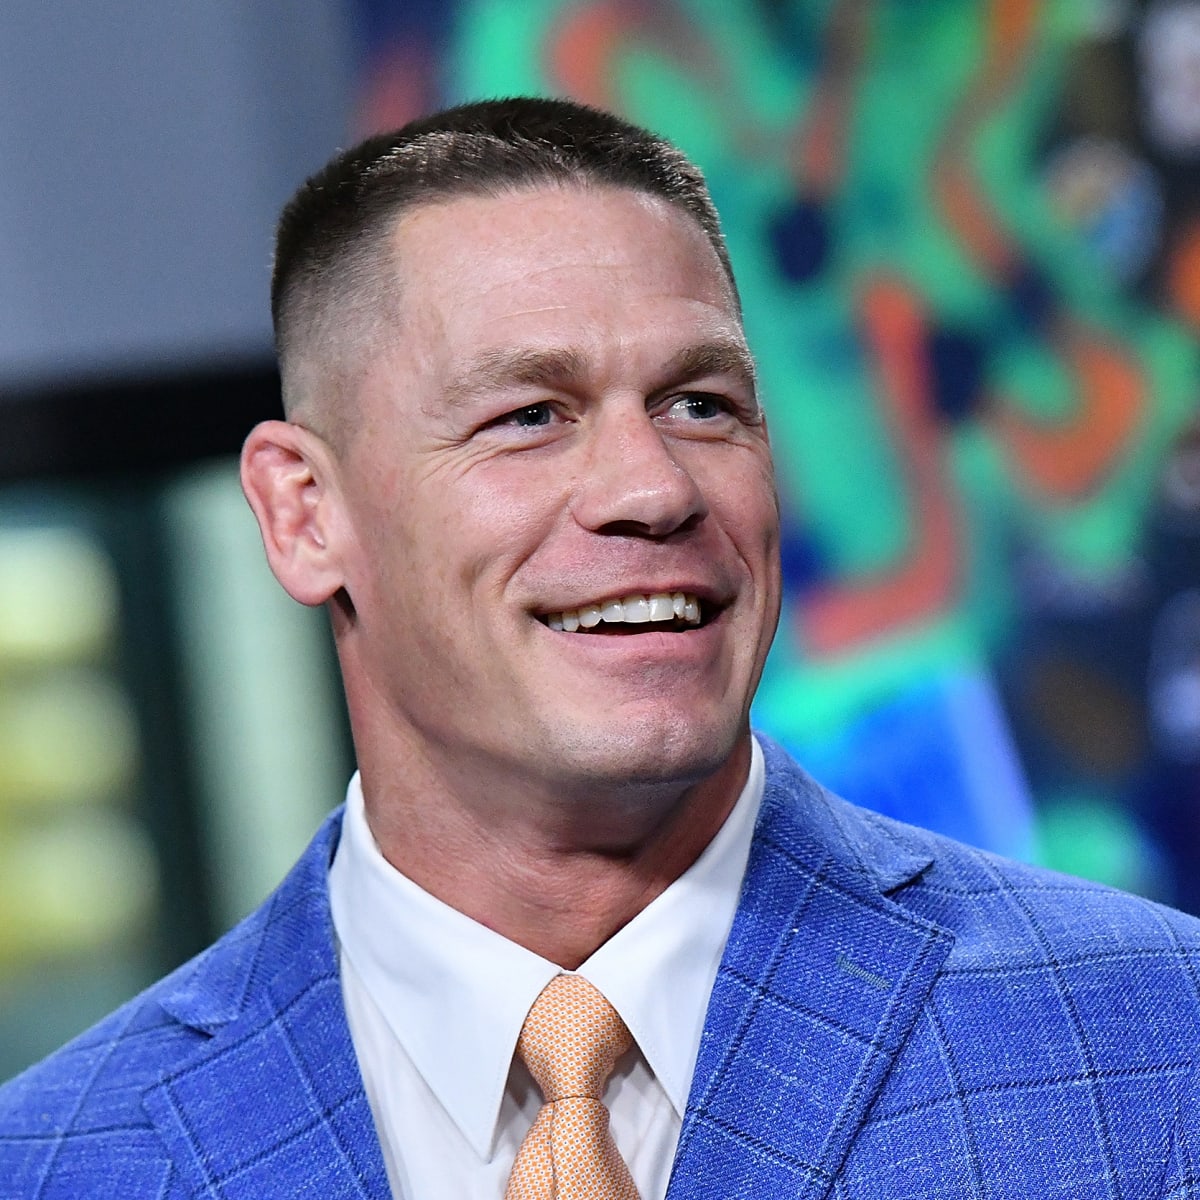 John Cena Compares His Current Haircut To Homer Simpson Wrestling News   WWE News AEW News WWE Results Spoilers WWE Night of Champions Results   WrestlingNewsSourceCom